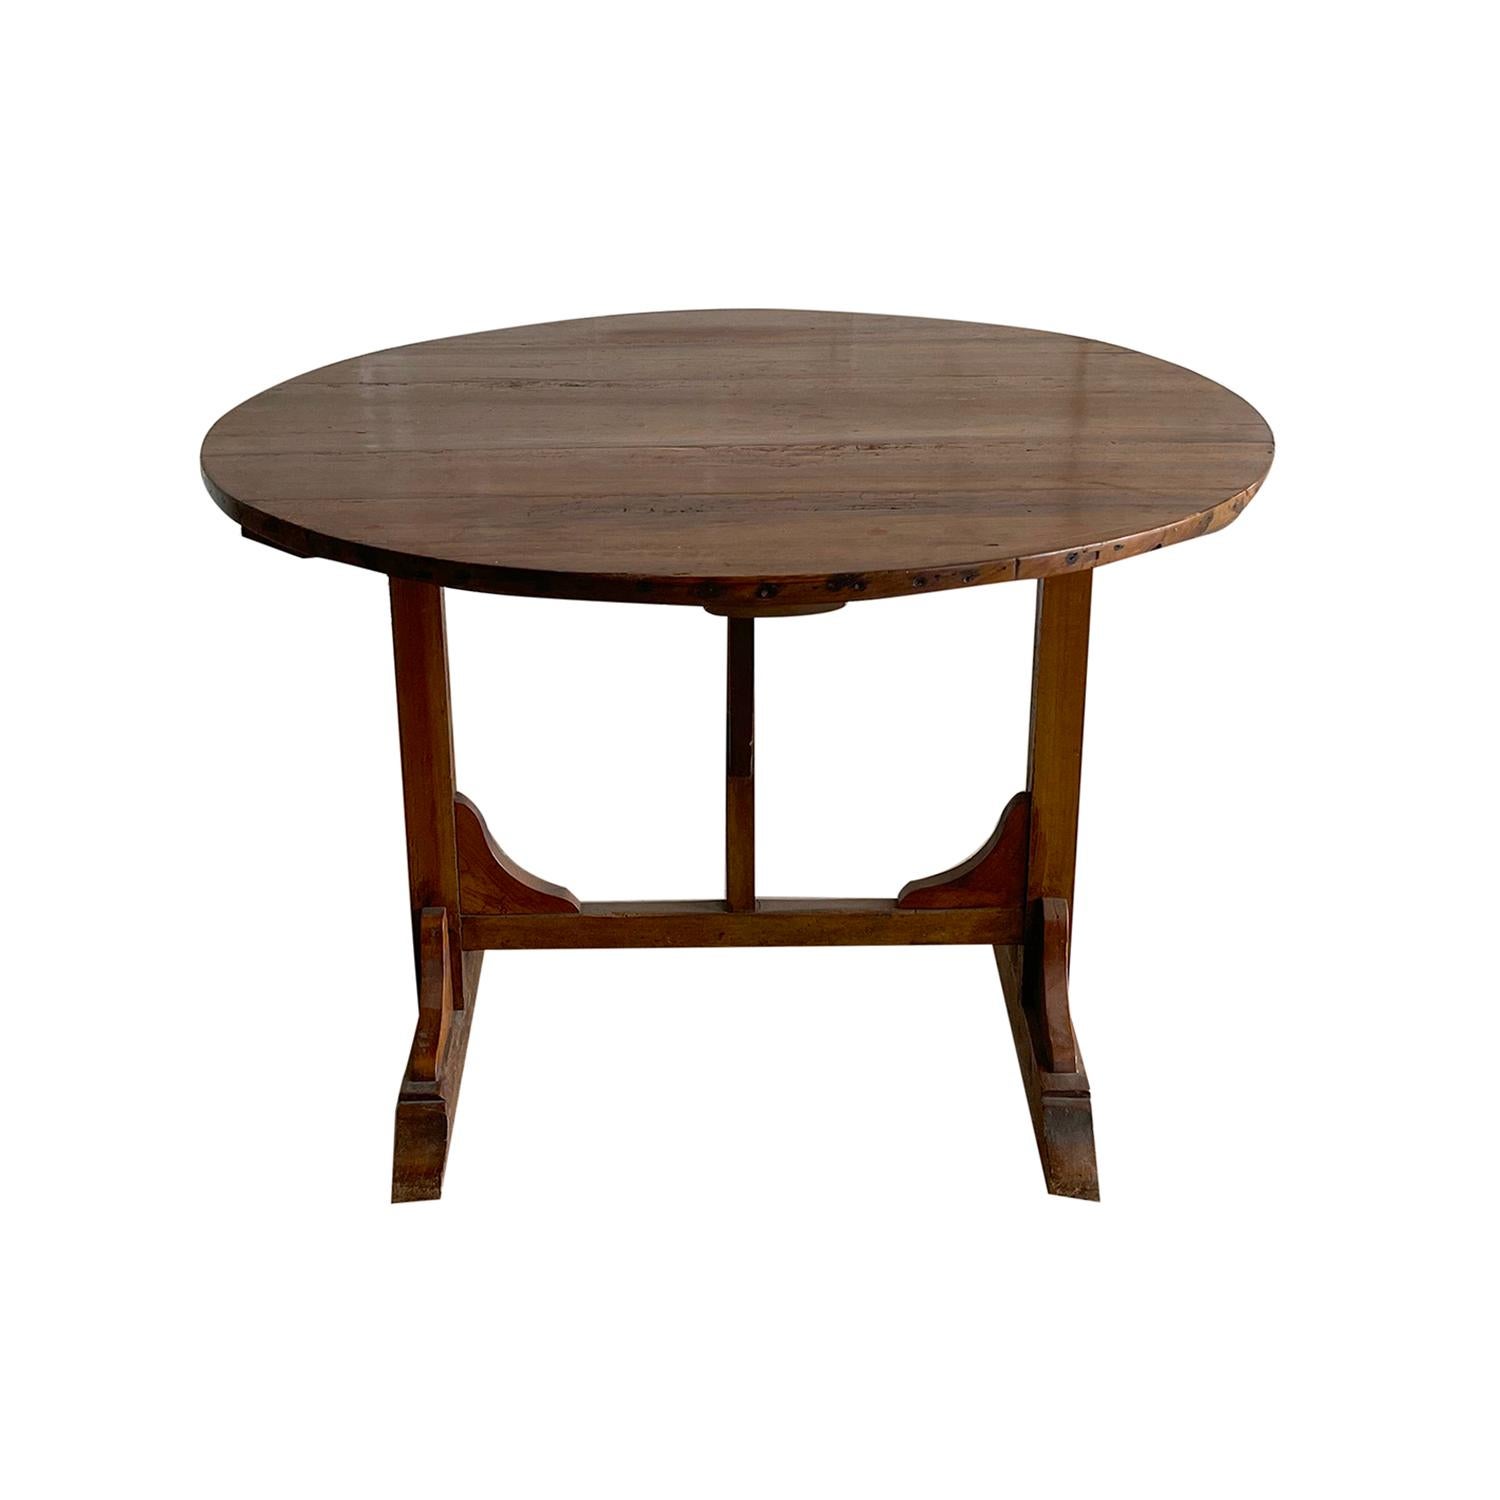 An antique round French wine folding table made of hand carved Walnut, in good condition. The Vigneron tables are used in France as occasional tables in wine cellars. Wear consistent with age and use. Circa 1880, France.